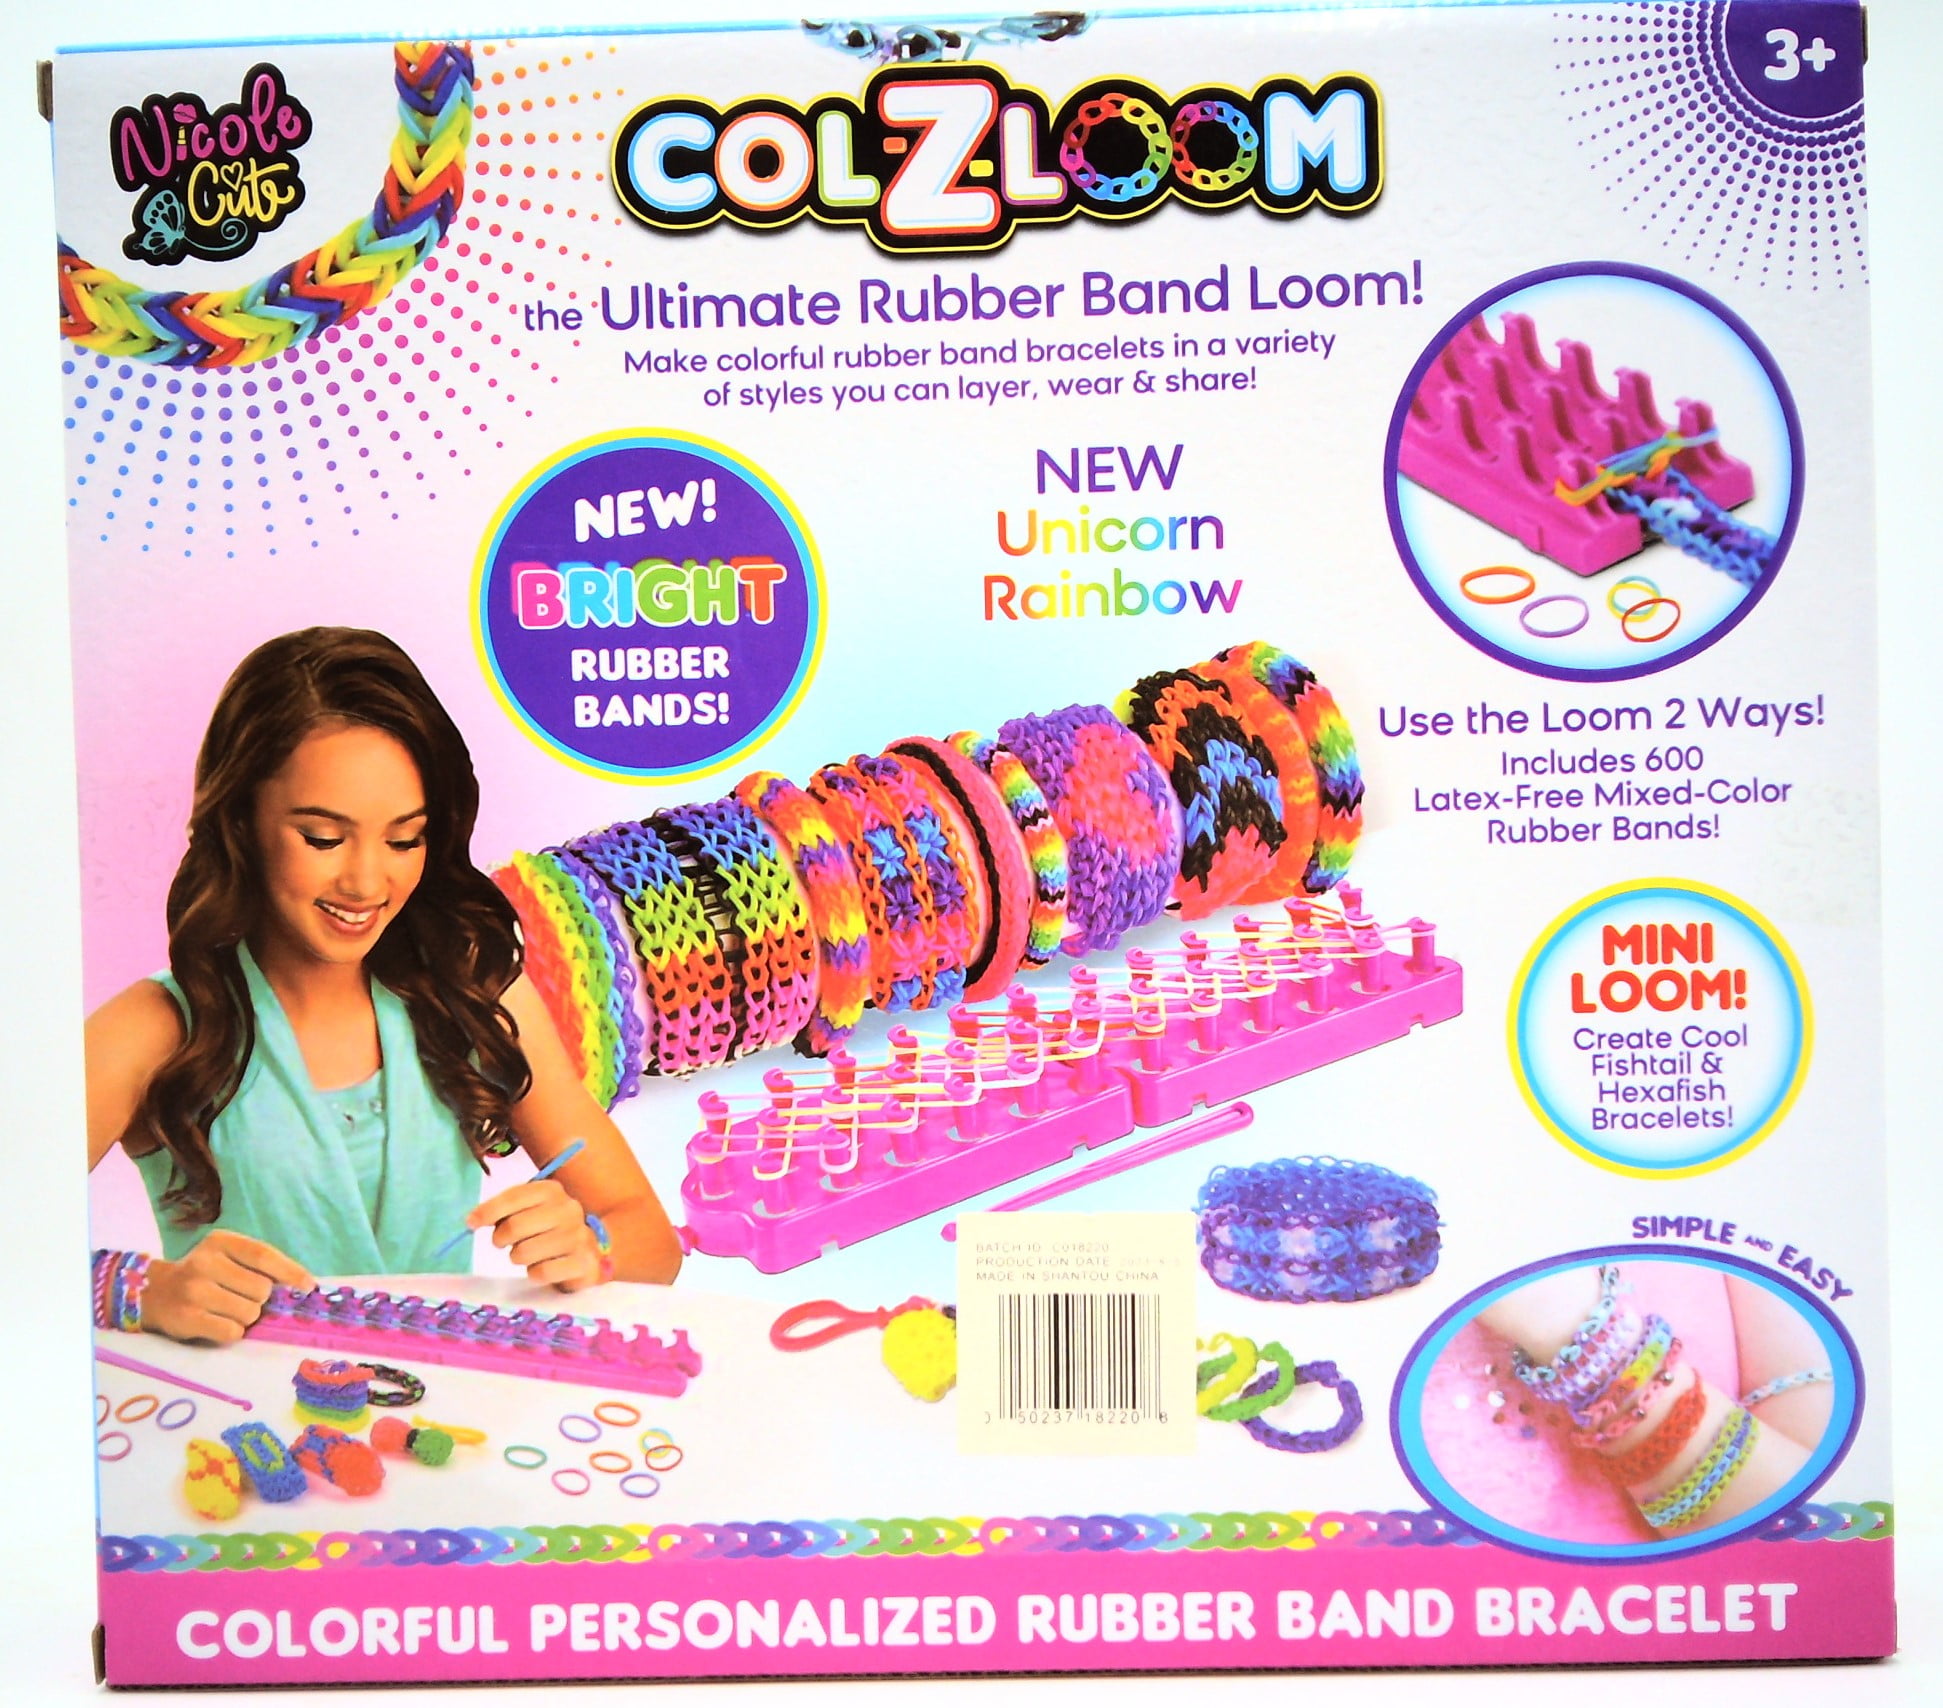 The ultimate rubber band maker – Workingdeals